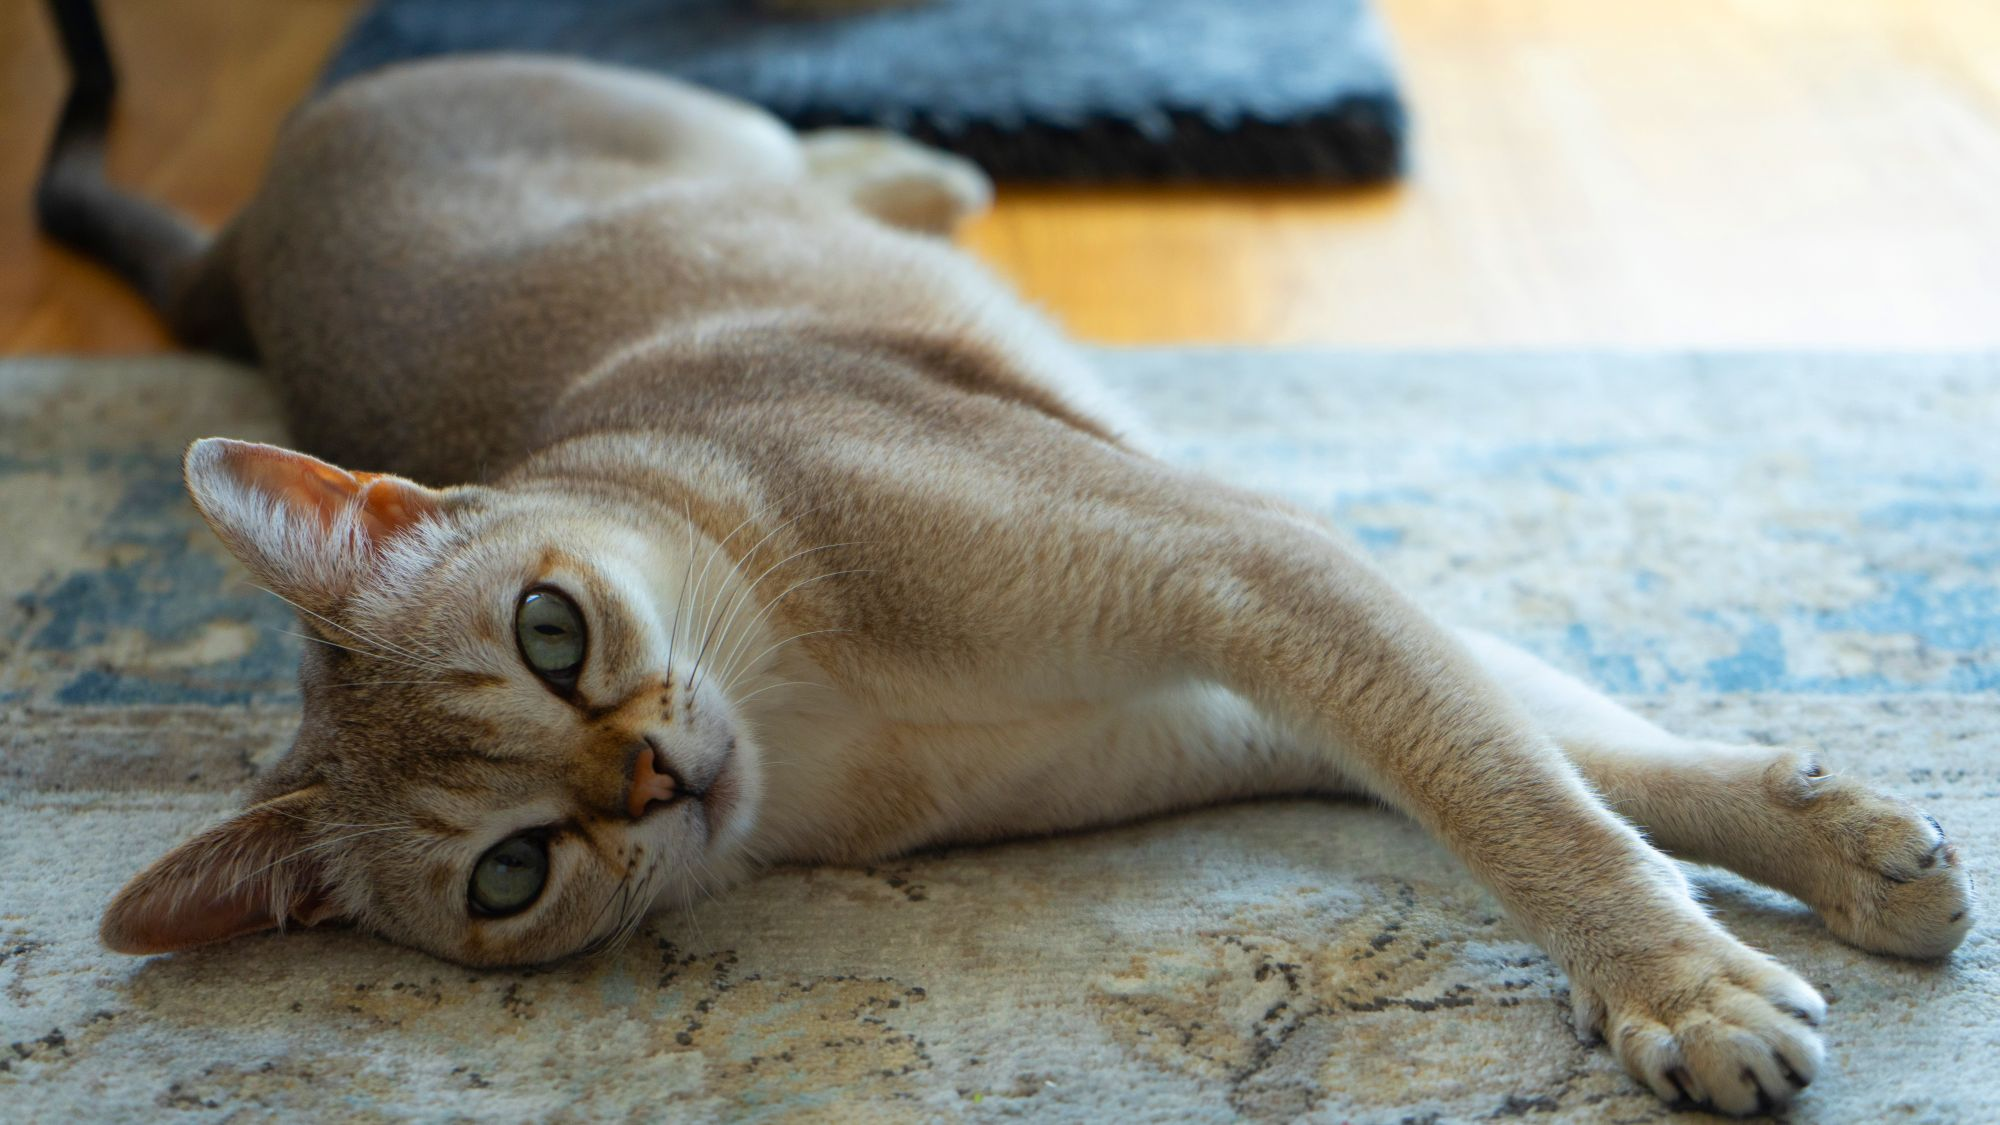 Singapura lying on its side on blue and beige rug looking at camera